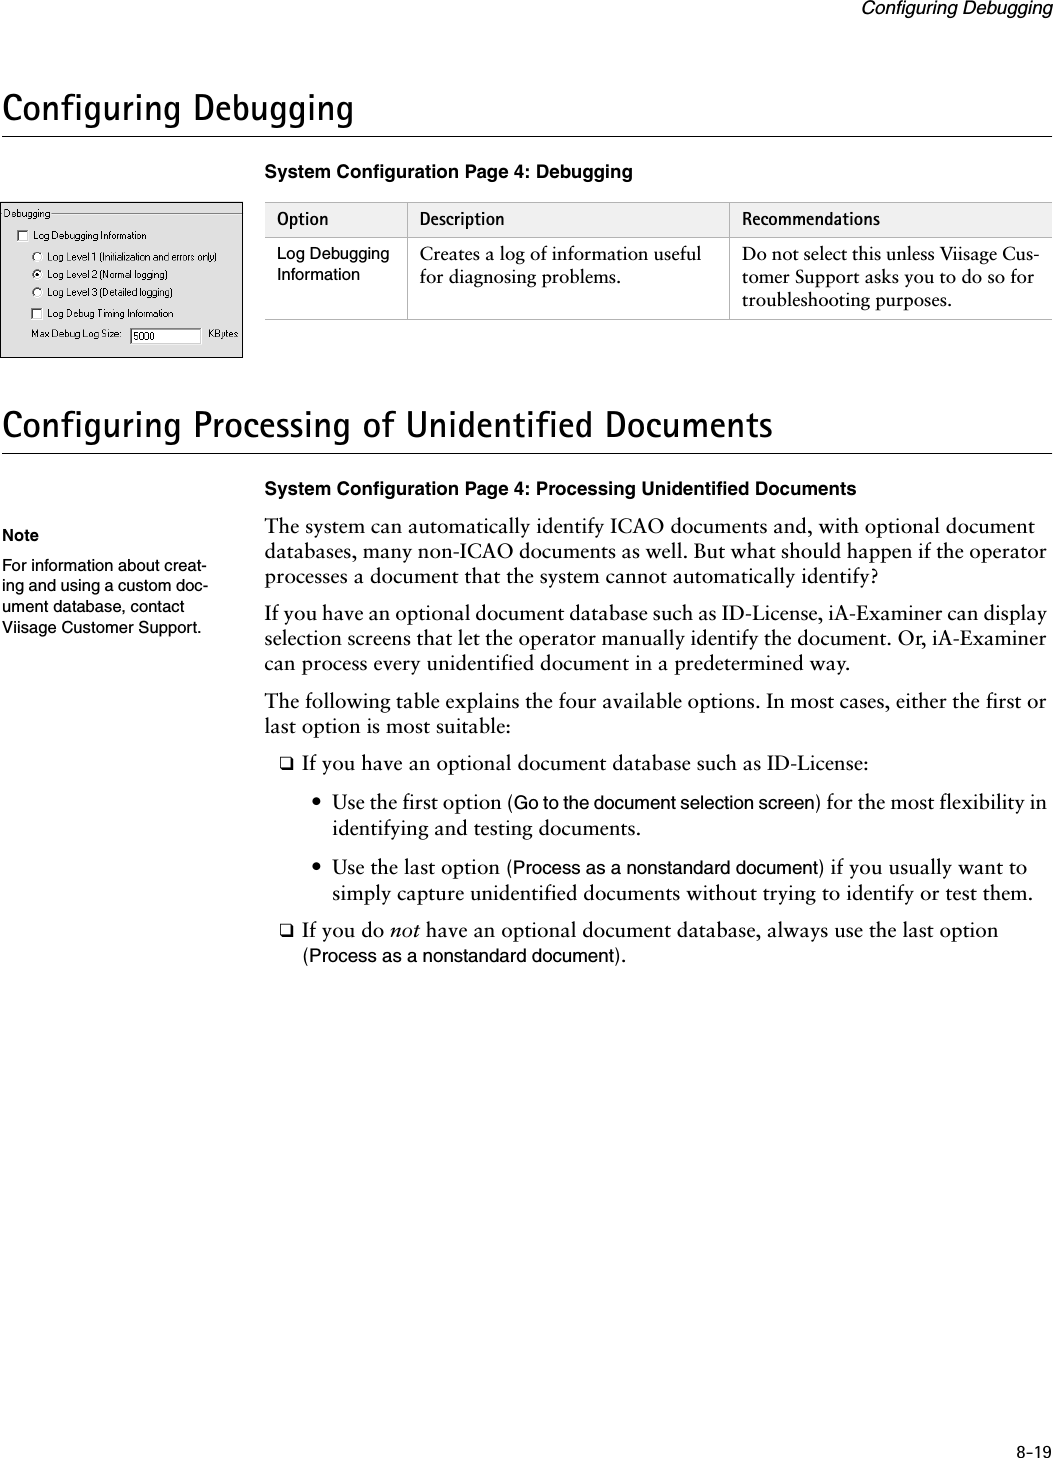 8-19Configuring DebuggingConfiguring DebuggingSystem Configuration Page 4: DebuggingConfiguring Processing of Unidentified DocumentsSystem Configuration Page 4: Processing Unidentified DocumentsThe system can automatically identify ICAO documents and, with optional document databases, many non-ICAO documents as well. But what should happen if the operator processes a document that the system cannot automatically identify?If you have an optional document database such as ID-License, iA-Examiner can display selection screens that let the operator manually identify the document. Or, iA-Examiner can process every unidentified document in a predetermined way.The following table explains the four available options. In most cases, either the first or last option is most suitable:❑If you have an optional document database such as ID-License:•Use the first option (Go to the document selection screen) for the most flexibility in identifying and testing documents.•Use the last option (Process as a nonstandard document) if you usually want to simply capture unidentified documents without trying to identify or test them.❑If you do not have an optional document database, always use the last option (Process as a nonstandard document).Option Description RecommendationsLog Debugging InformationCreates a log of information useful for diagnosing problems.Do not select this unless Viisage Cus-tomer Support asks you to do so for troubleshooting purposes.NoteFor information about creat-ing and using a custom doc-ument database, contact Viisage Customer Support.